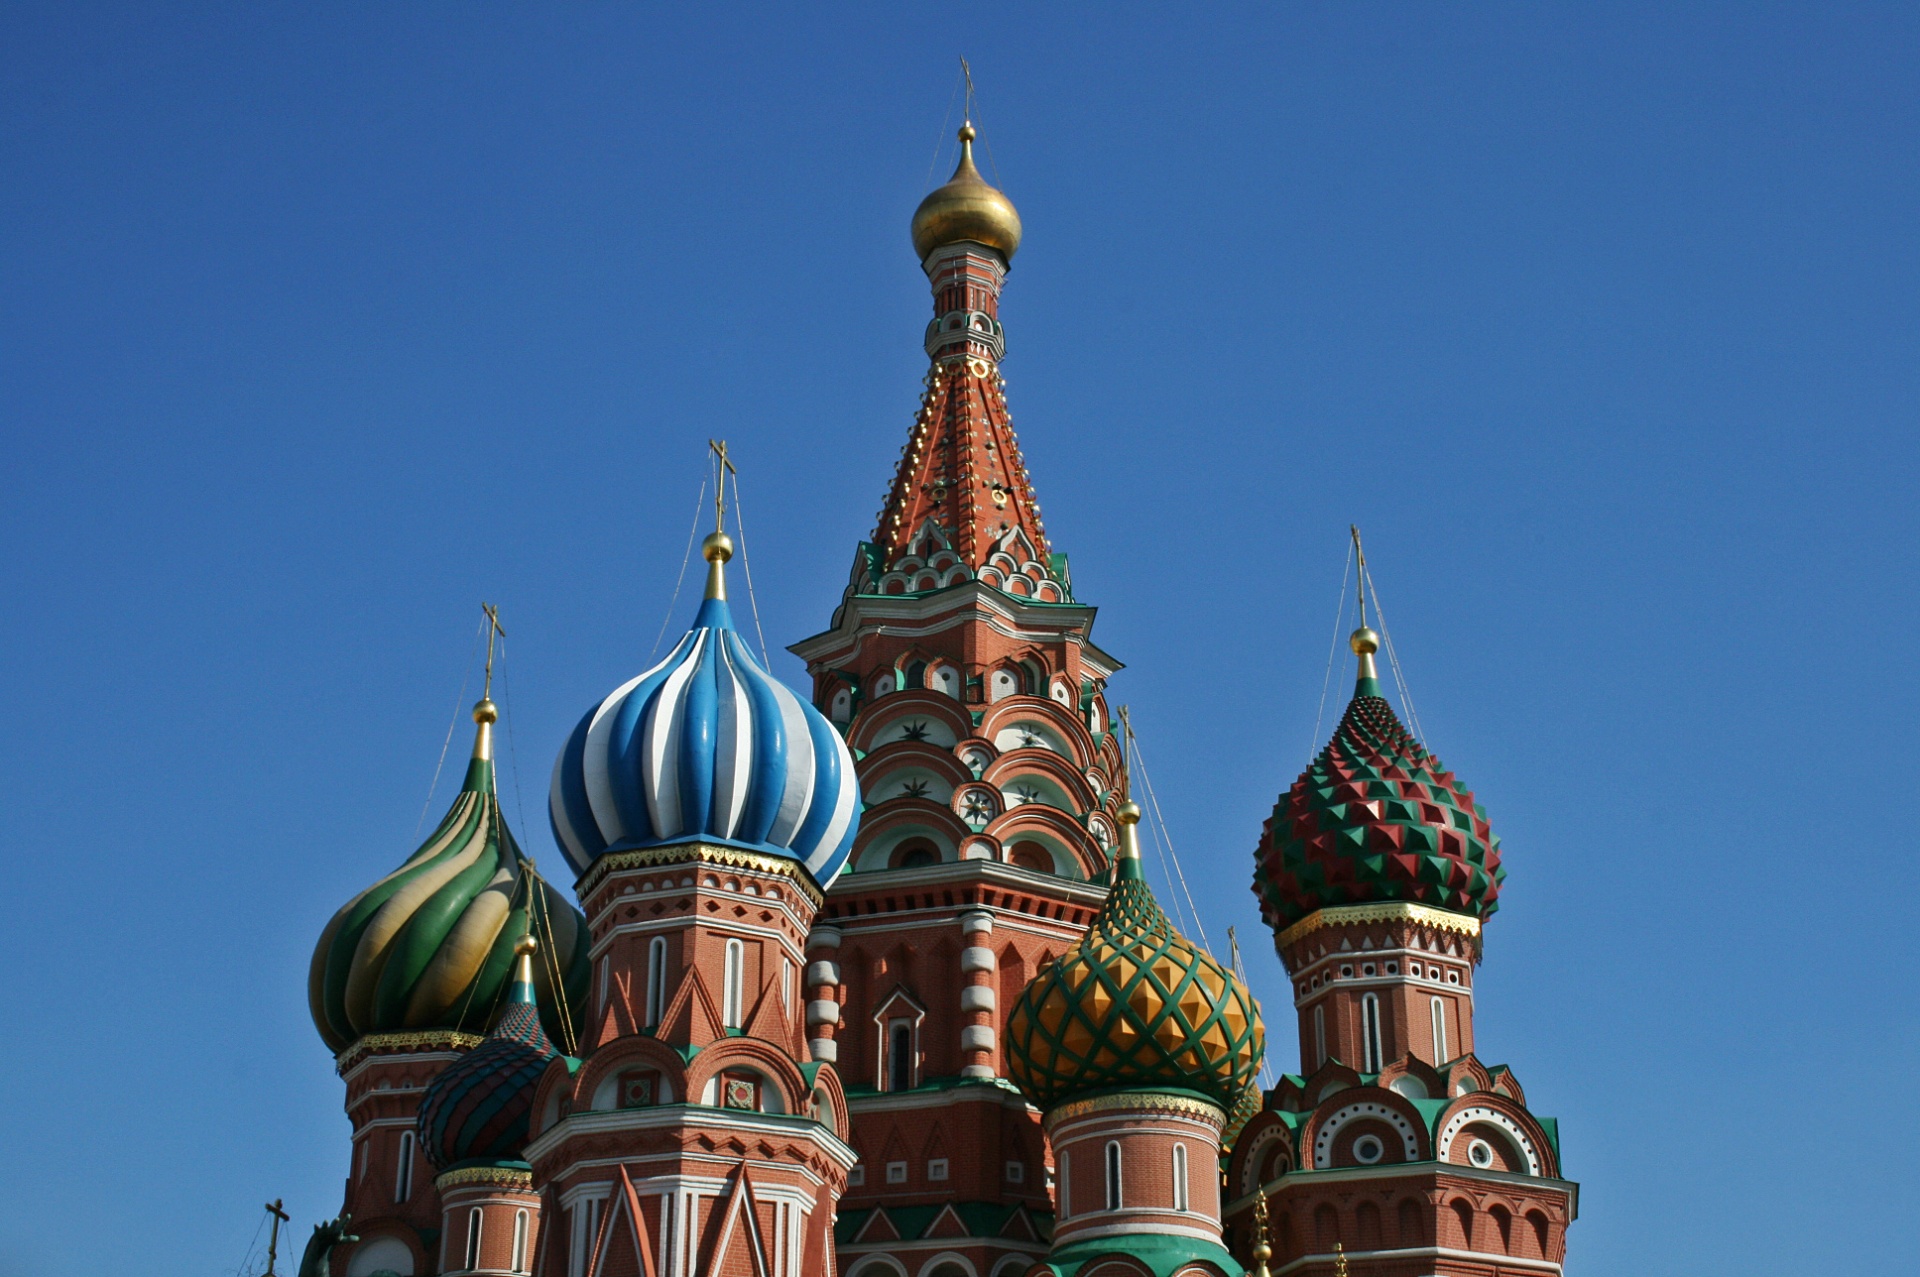 Spires Of Saint Basil's Cathedral